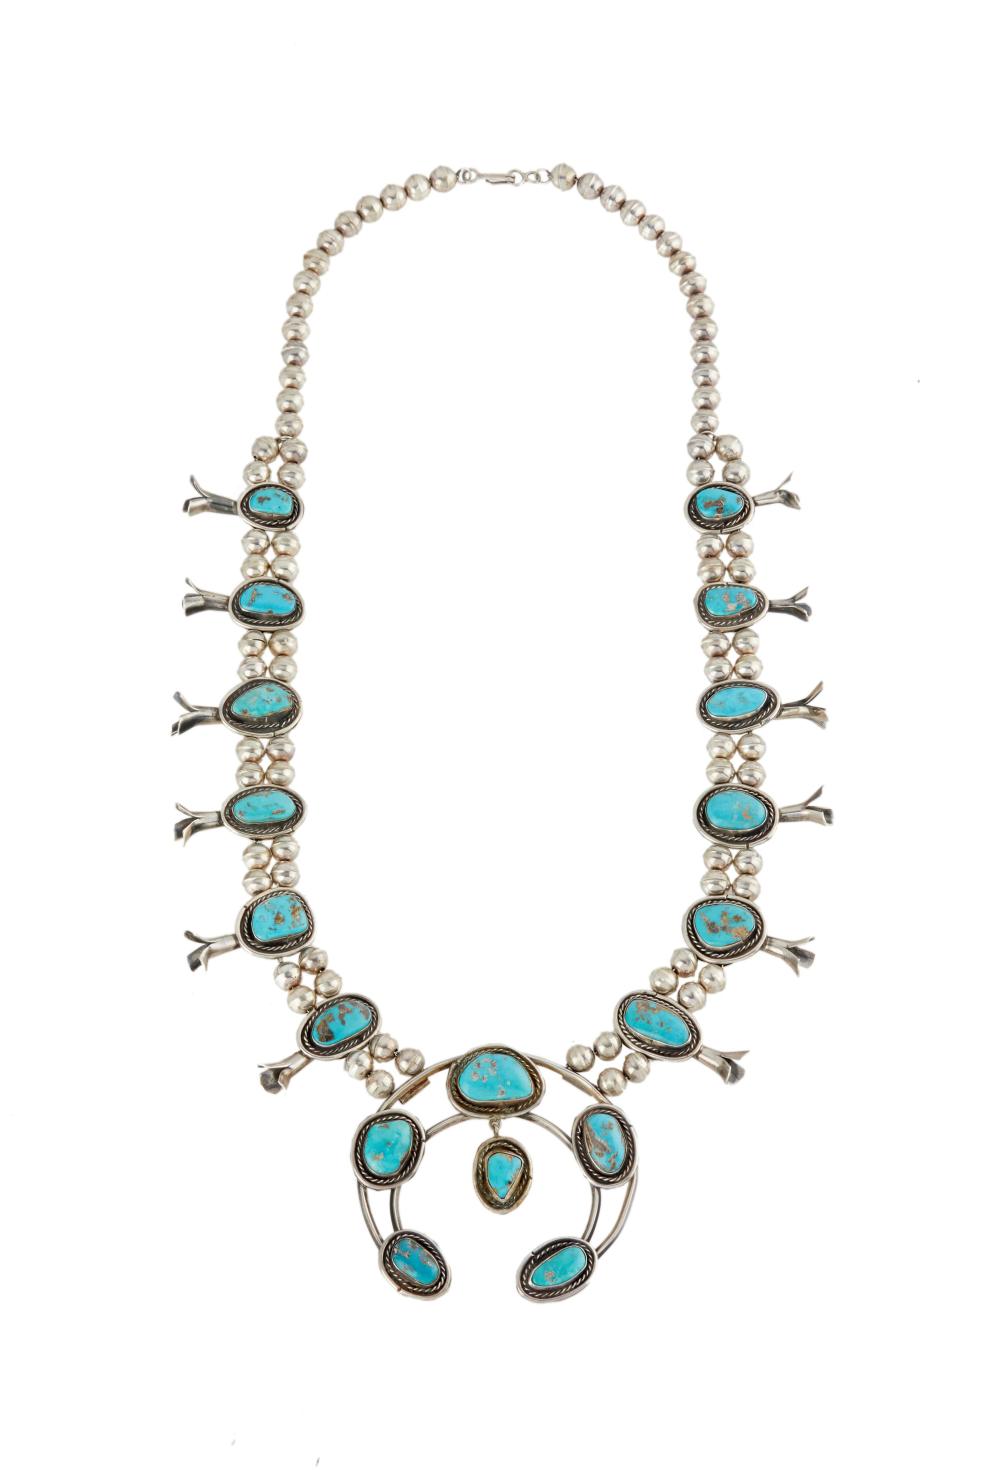 A TURQUOISE SQUASH BLOSSOM NECKLACEA 34306b